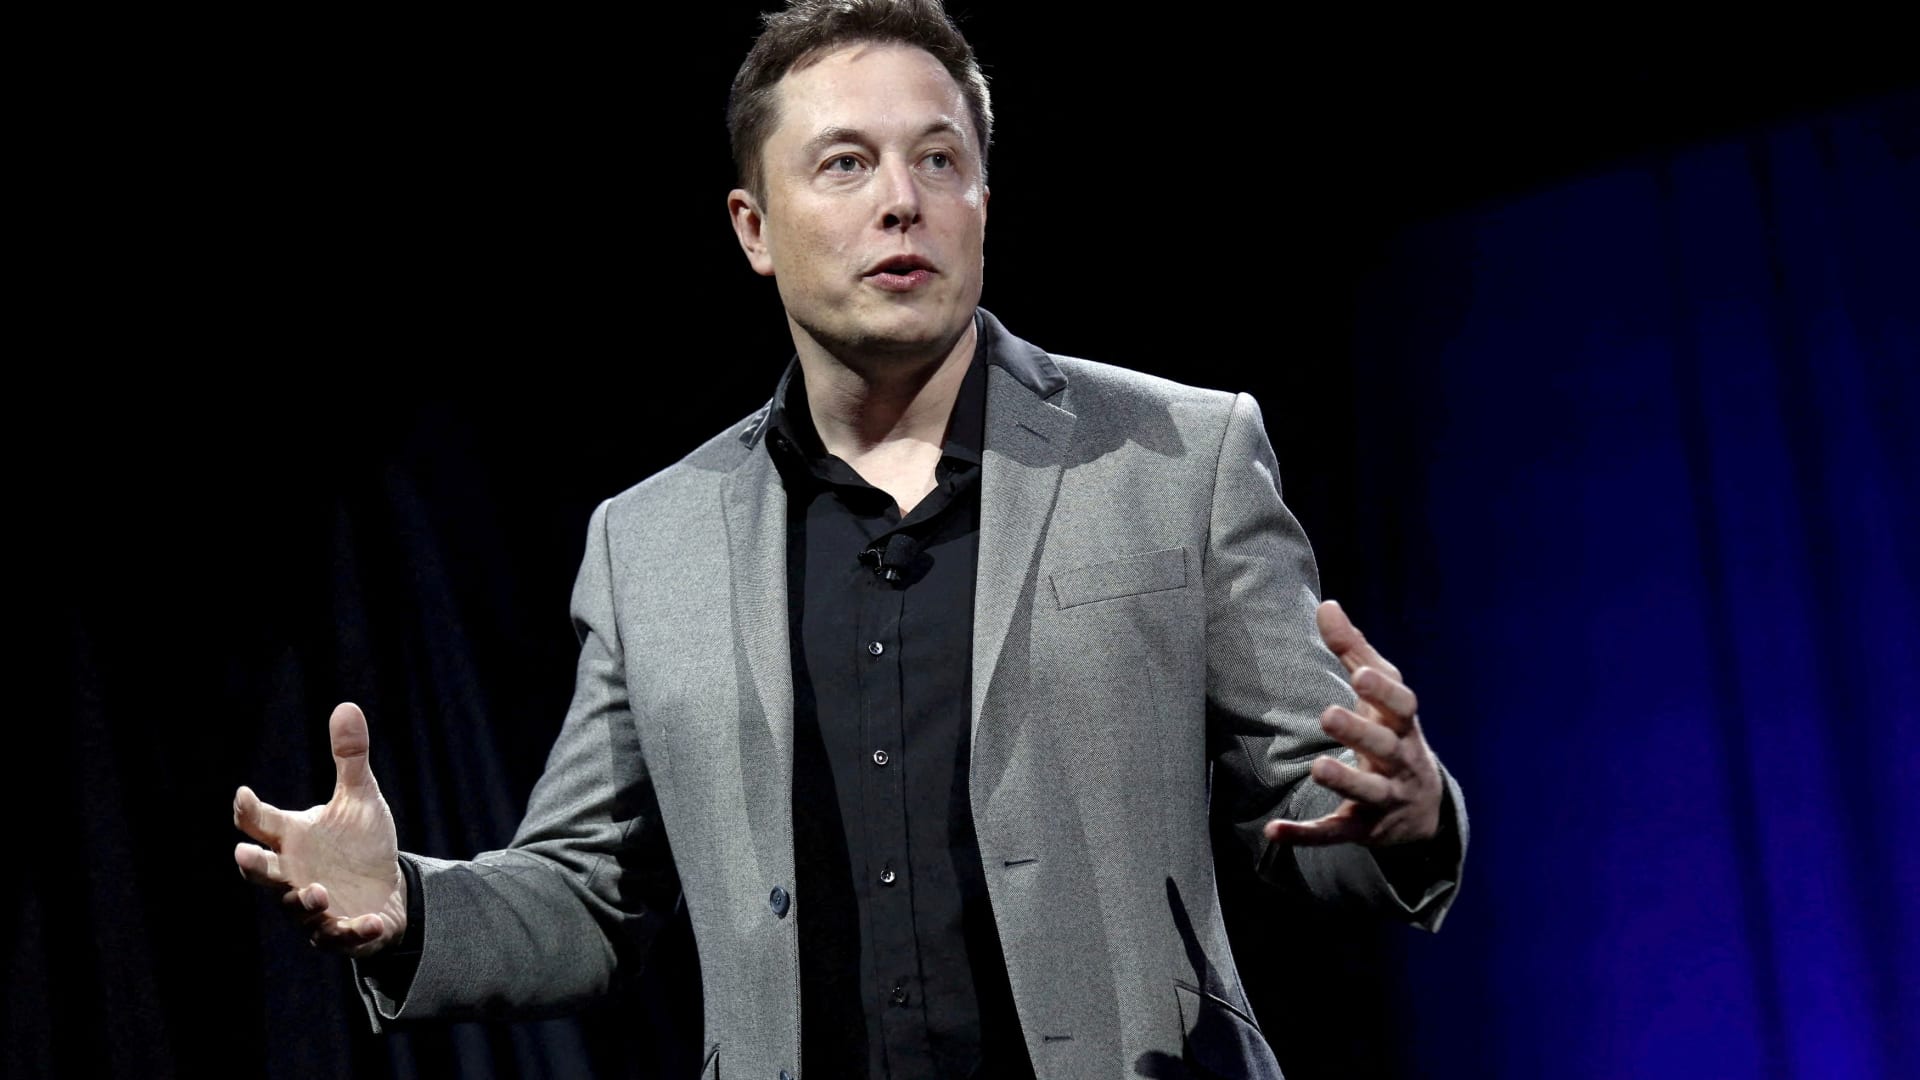 Elon Musk attorneys aim to move trial from California to Texas, citing ‘local ne..